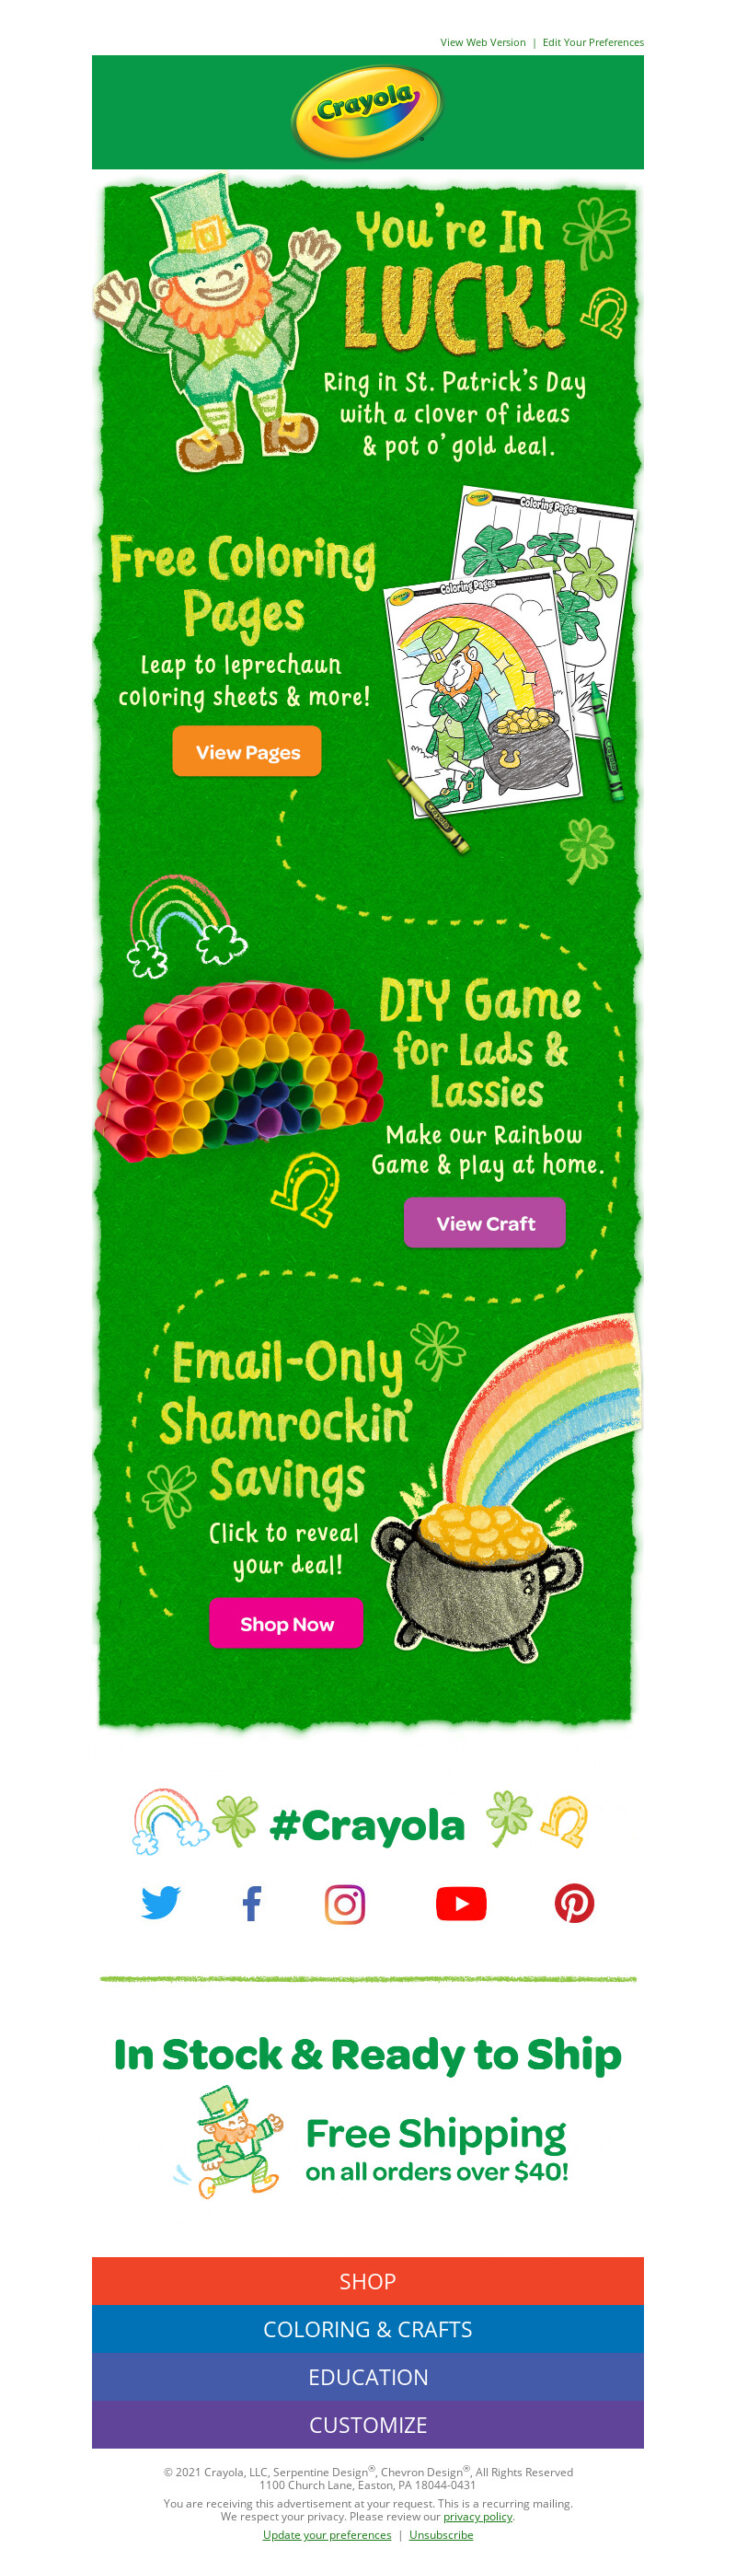 Crayola St. Patrick's Day freebies, DIY game, and exclusive deal email promotion.